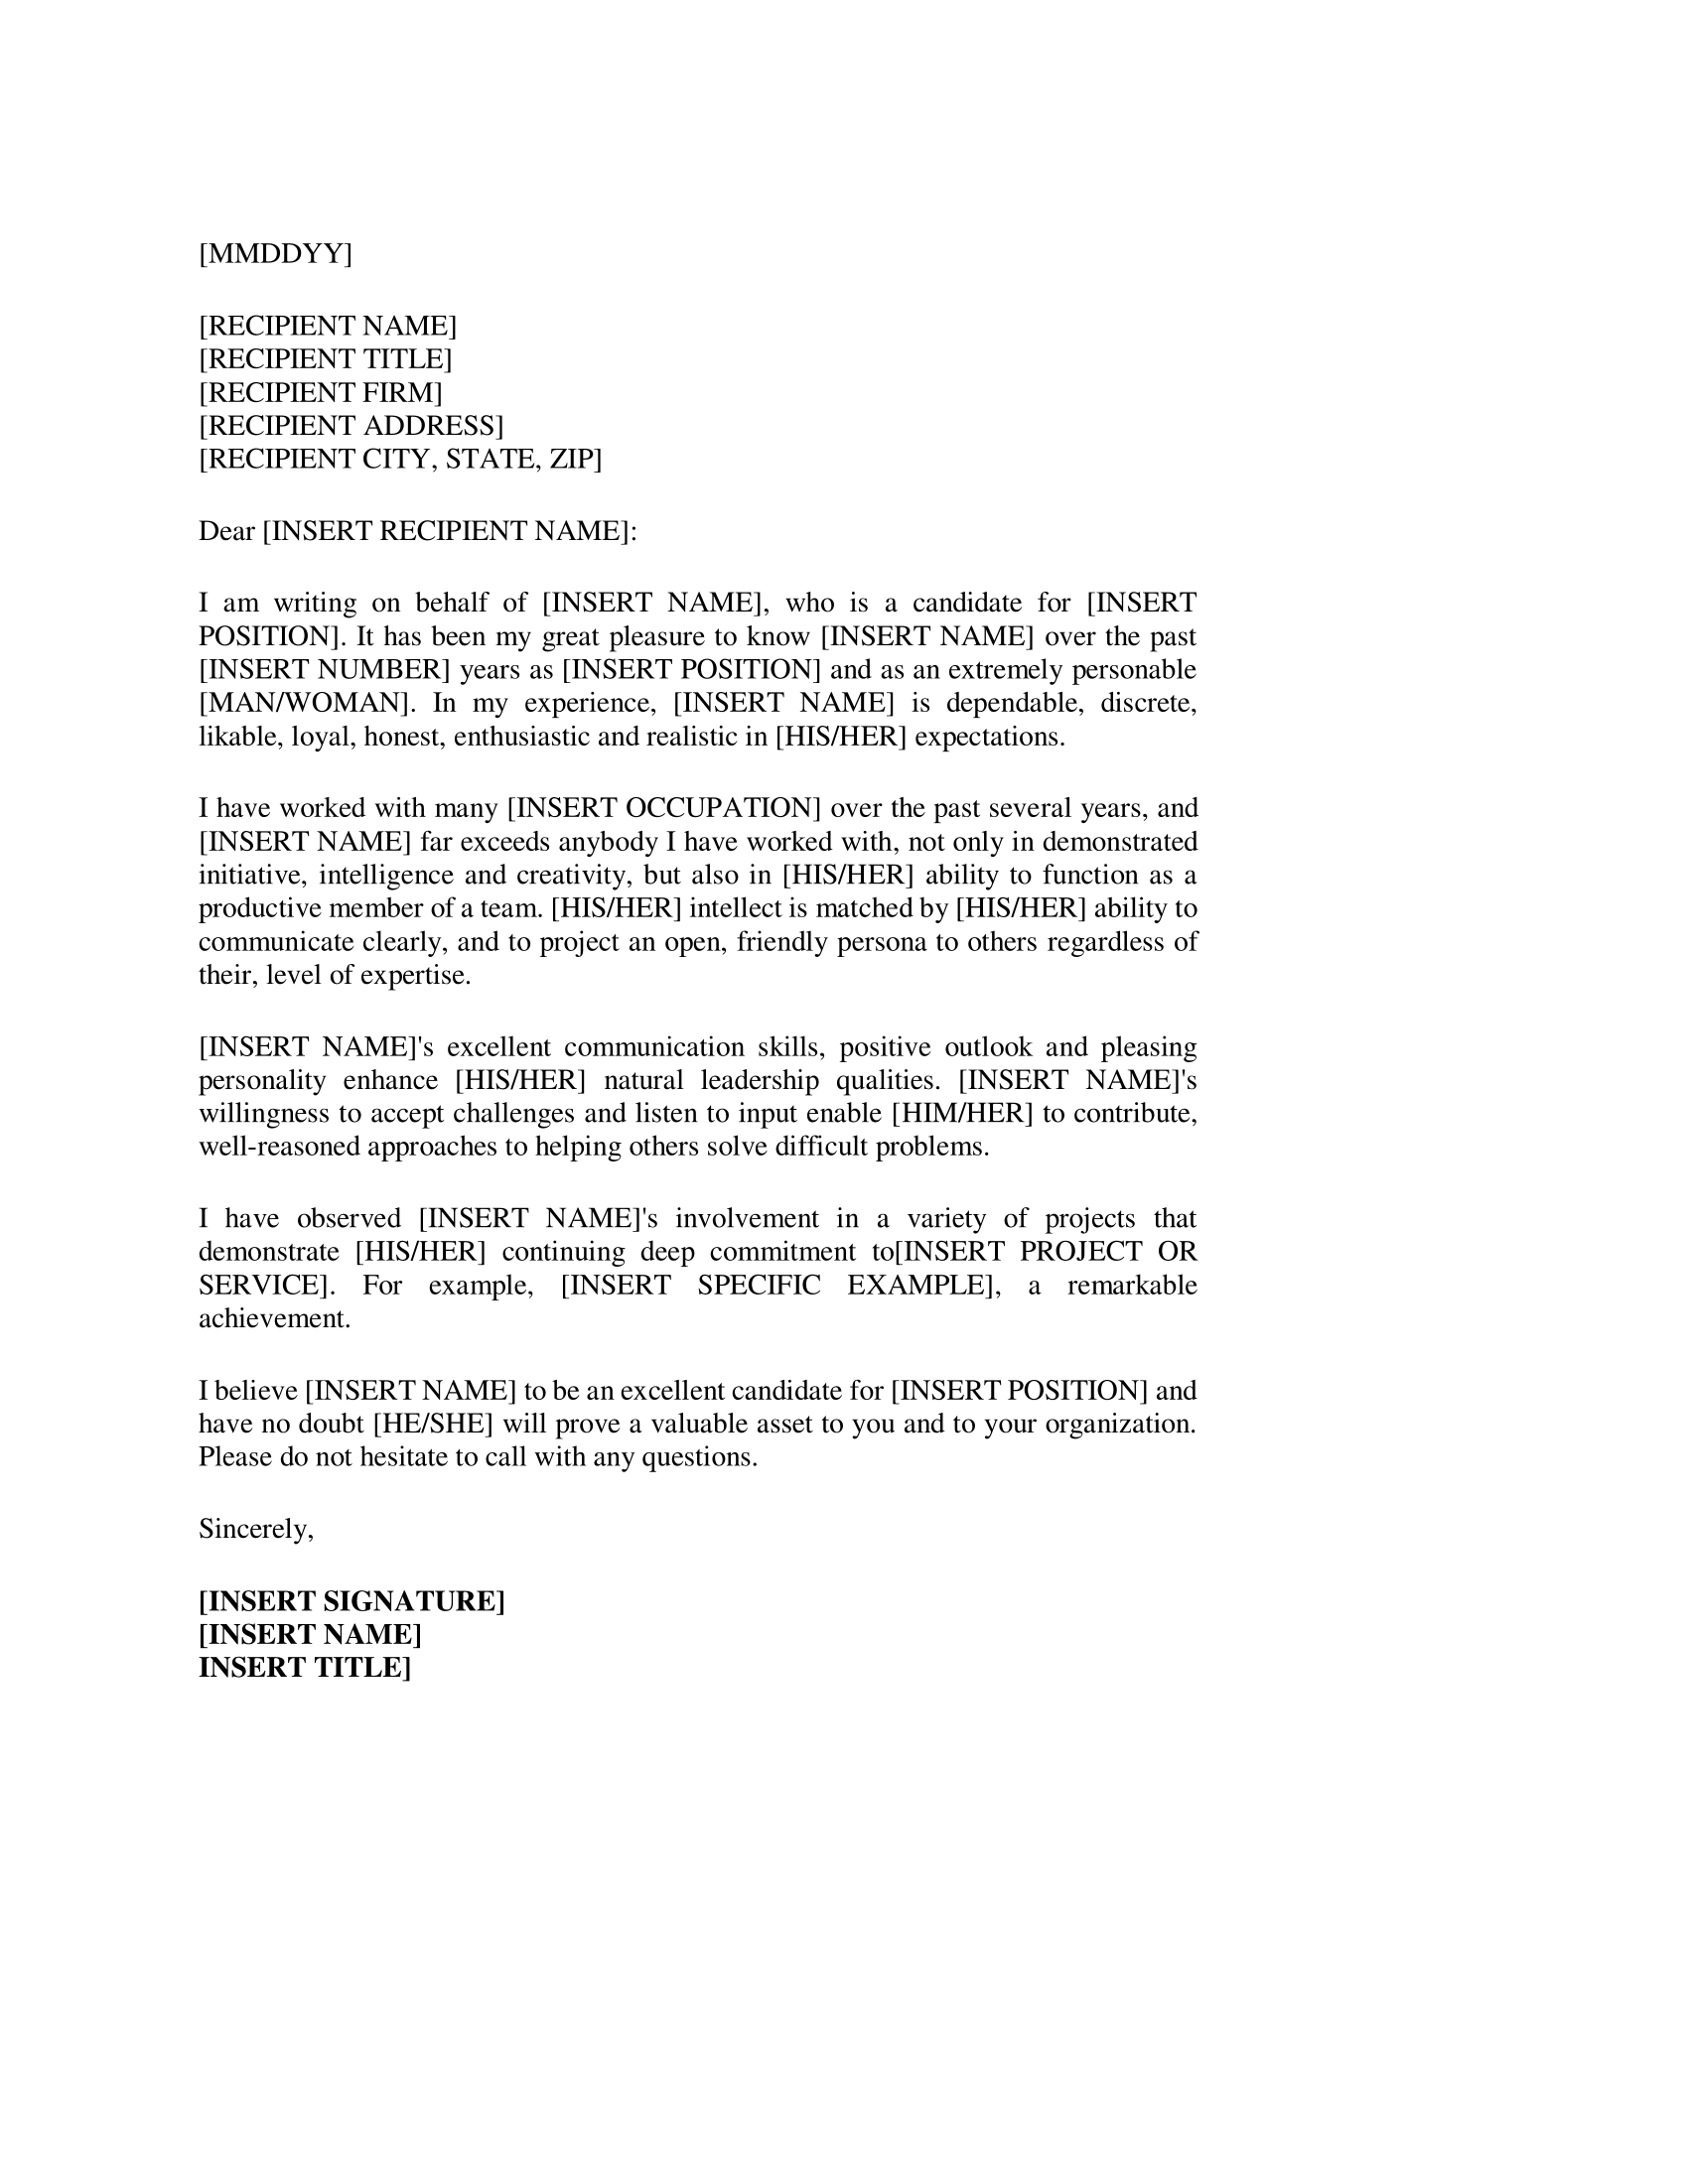 Free Letter Of Recommendation Template from officewriting.com